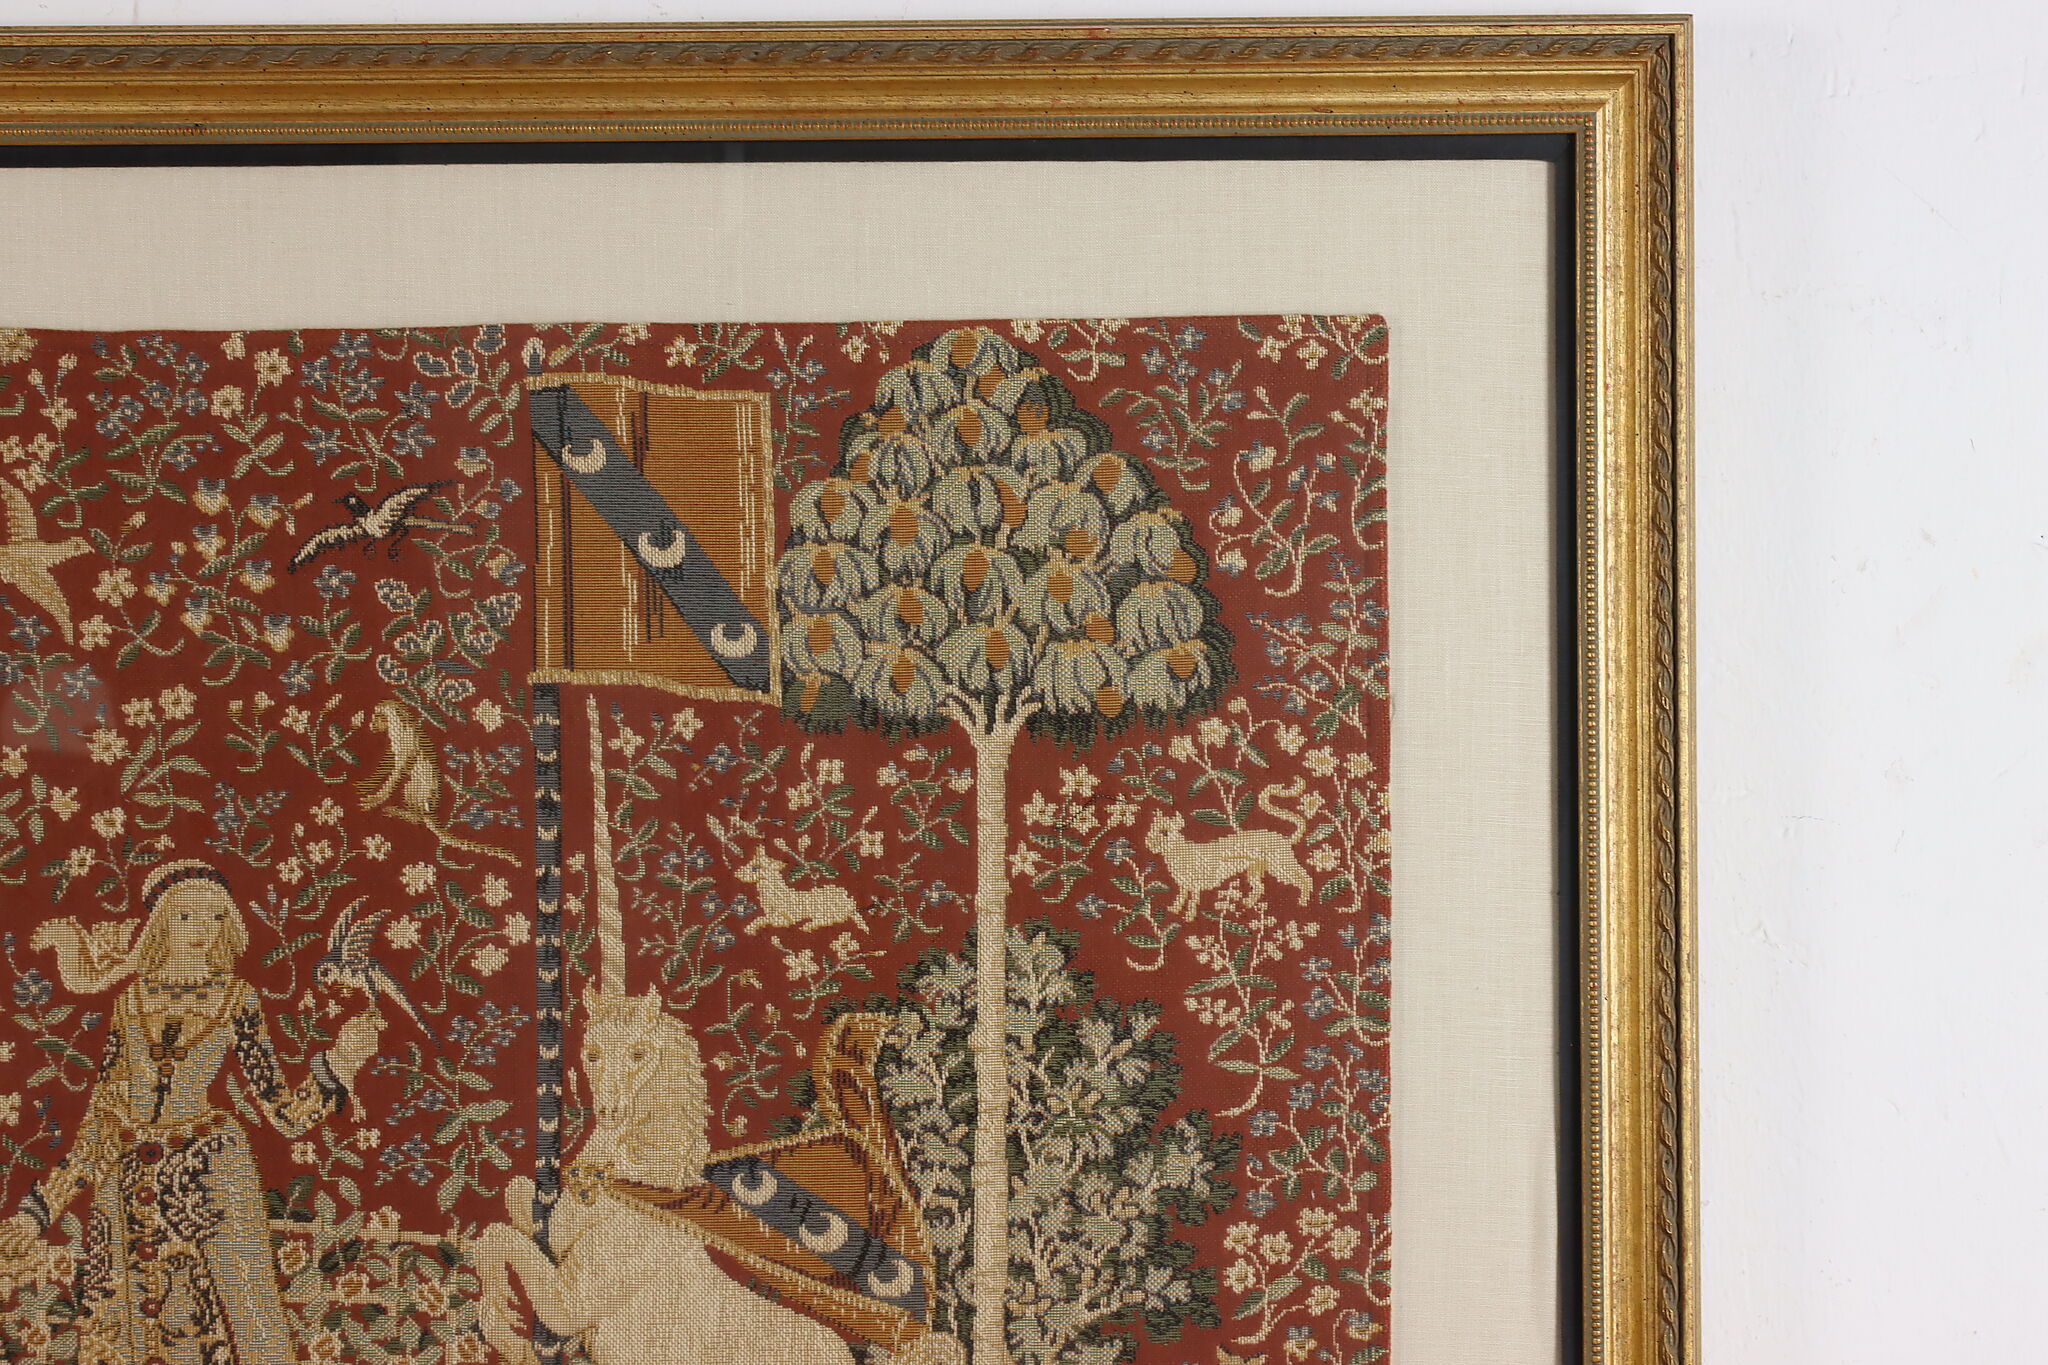 Medieval Room Wall Decor the Lady and the Unicorn Tapestry 